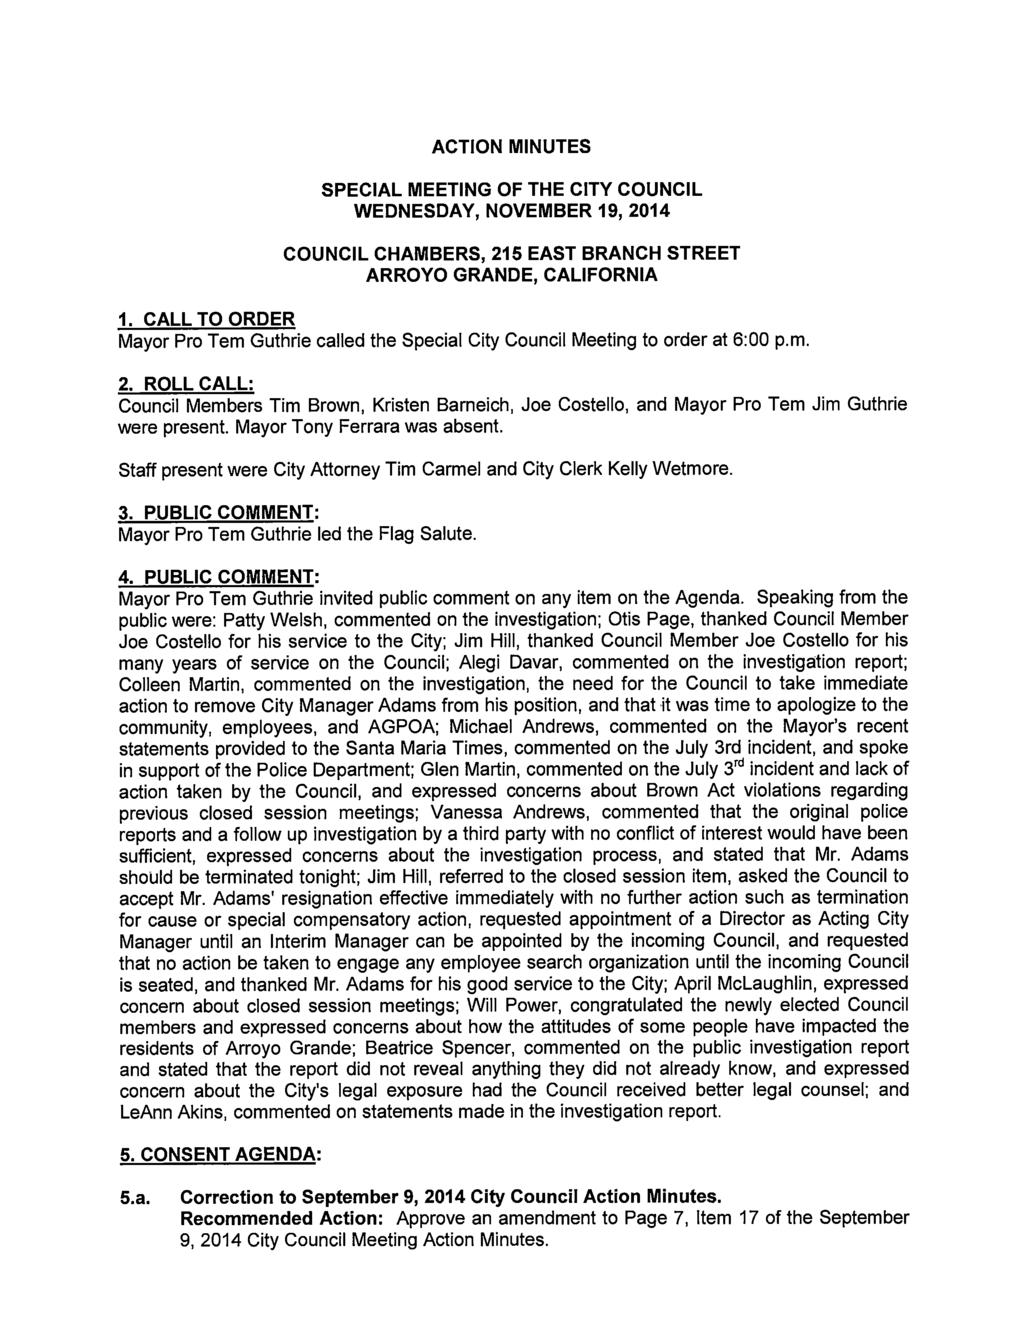 ACTION MINUTES SPECIAL MEETING OF THE CITY COUNCIL WEDNESDAY, NOVEMBER 19, 2014 COUNCIL CHAMBERS, 215 EAST BRANCH STREET ARROYO GRANDE, CALIFORNIA 1.